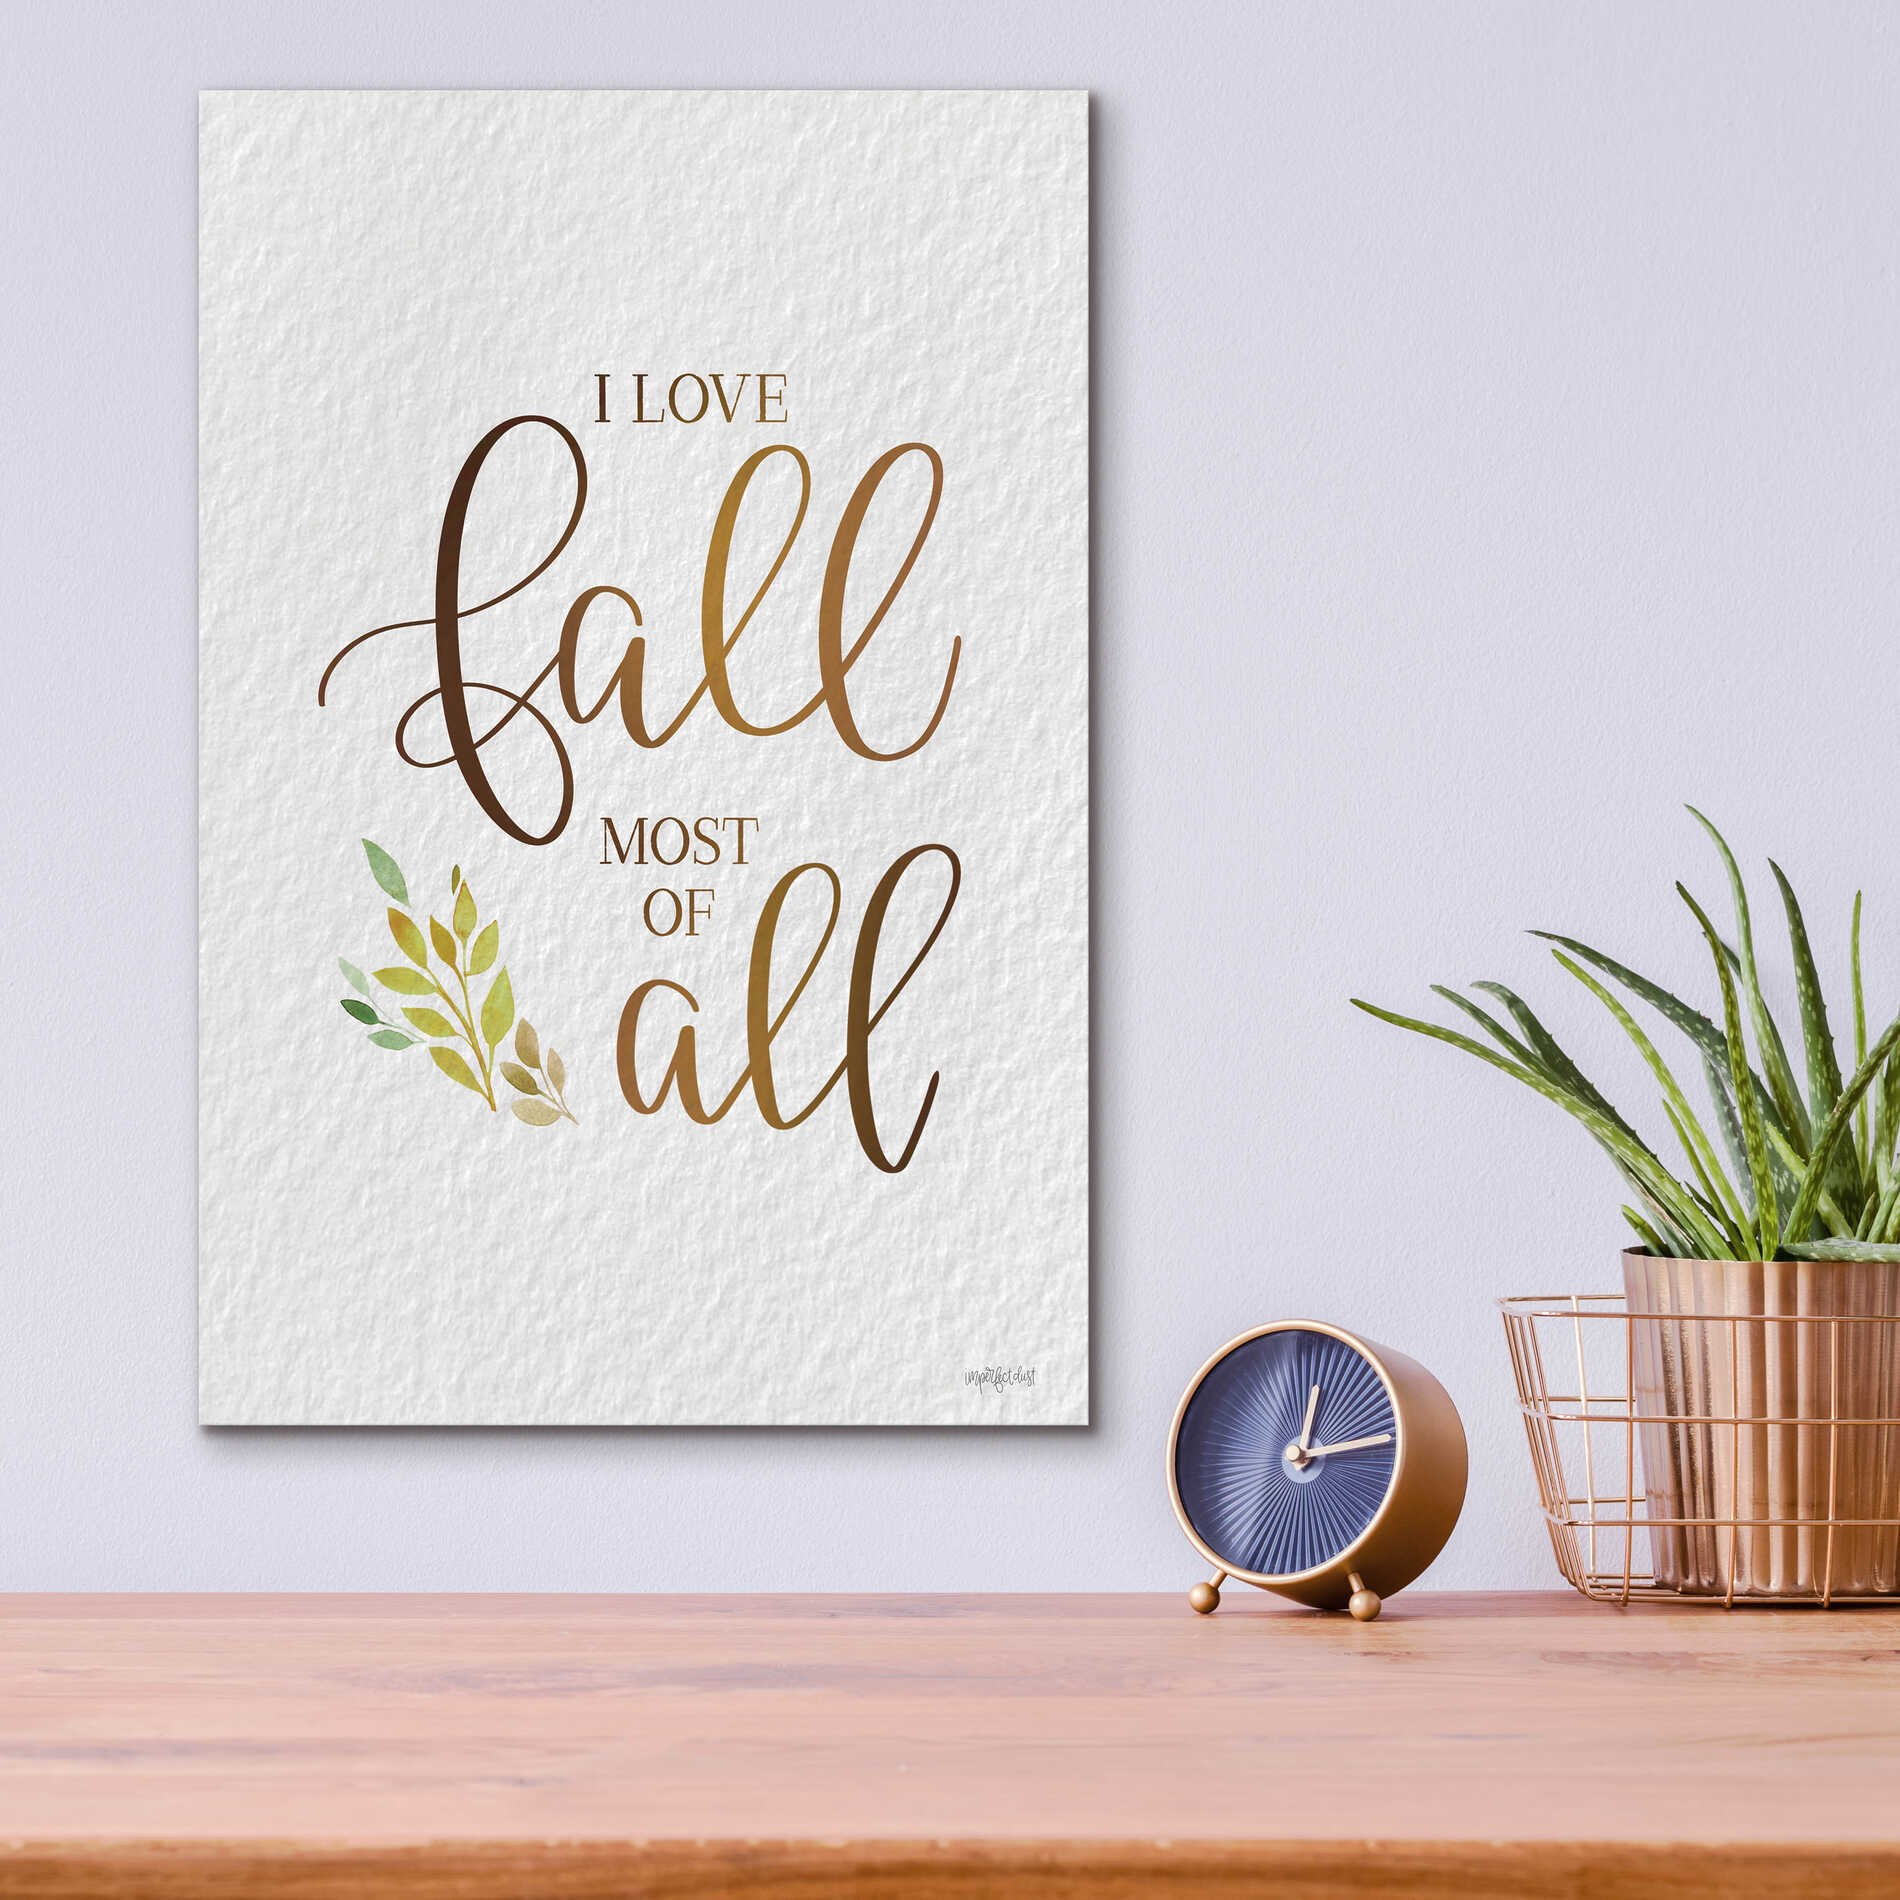 Epic Art 'I Love Fall Most of All' by Imperfect Dust, Acrylic Glass Wall Art,12x16